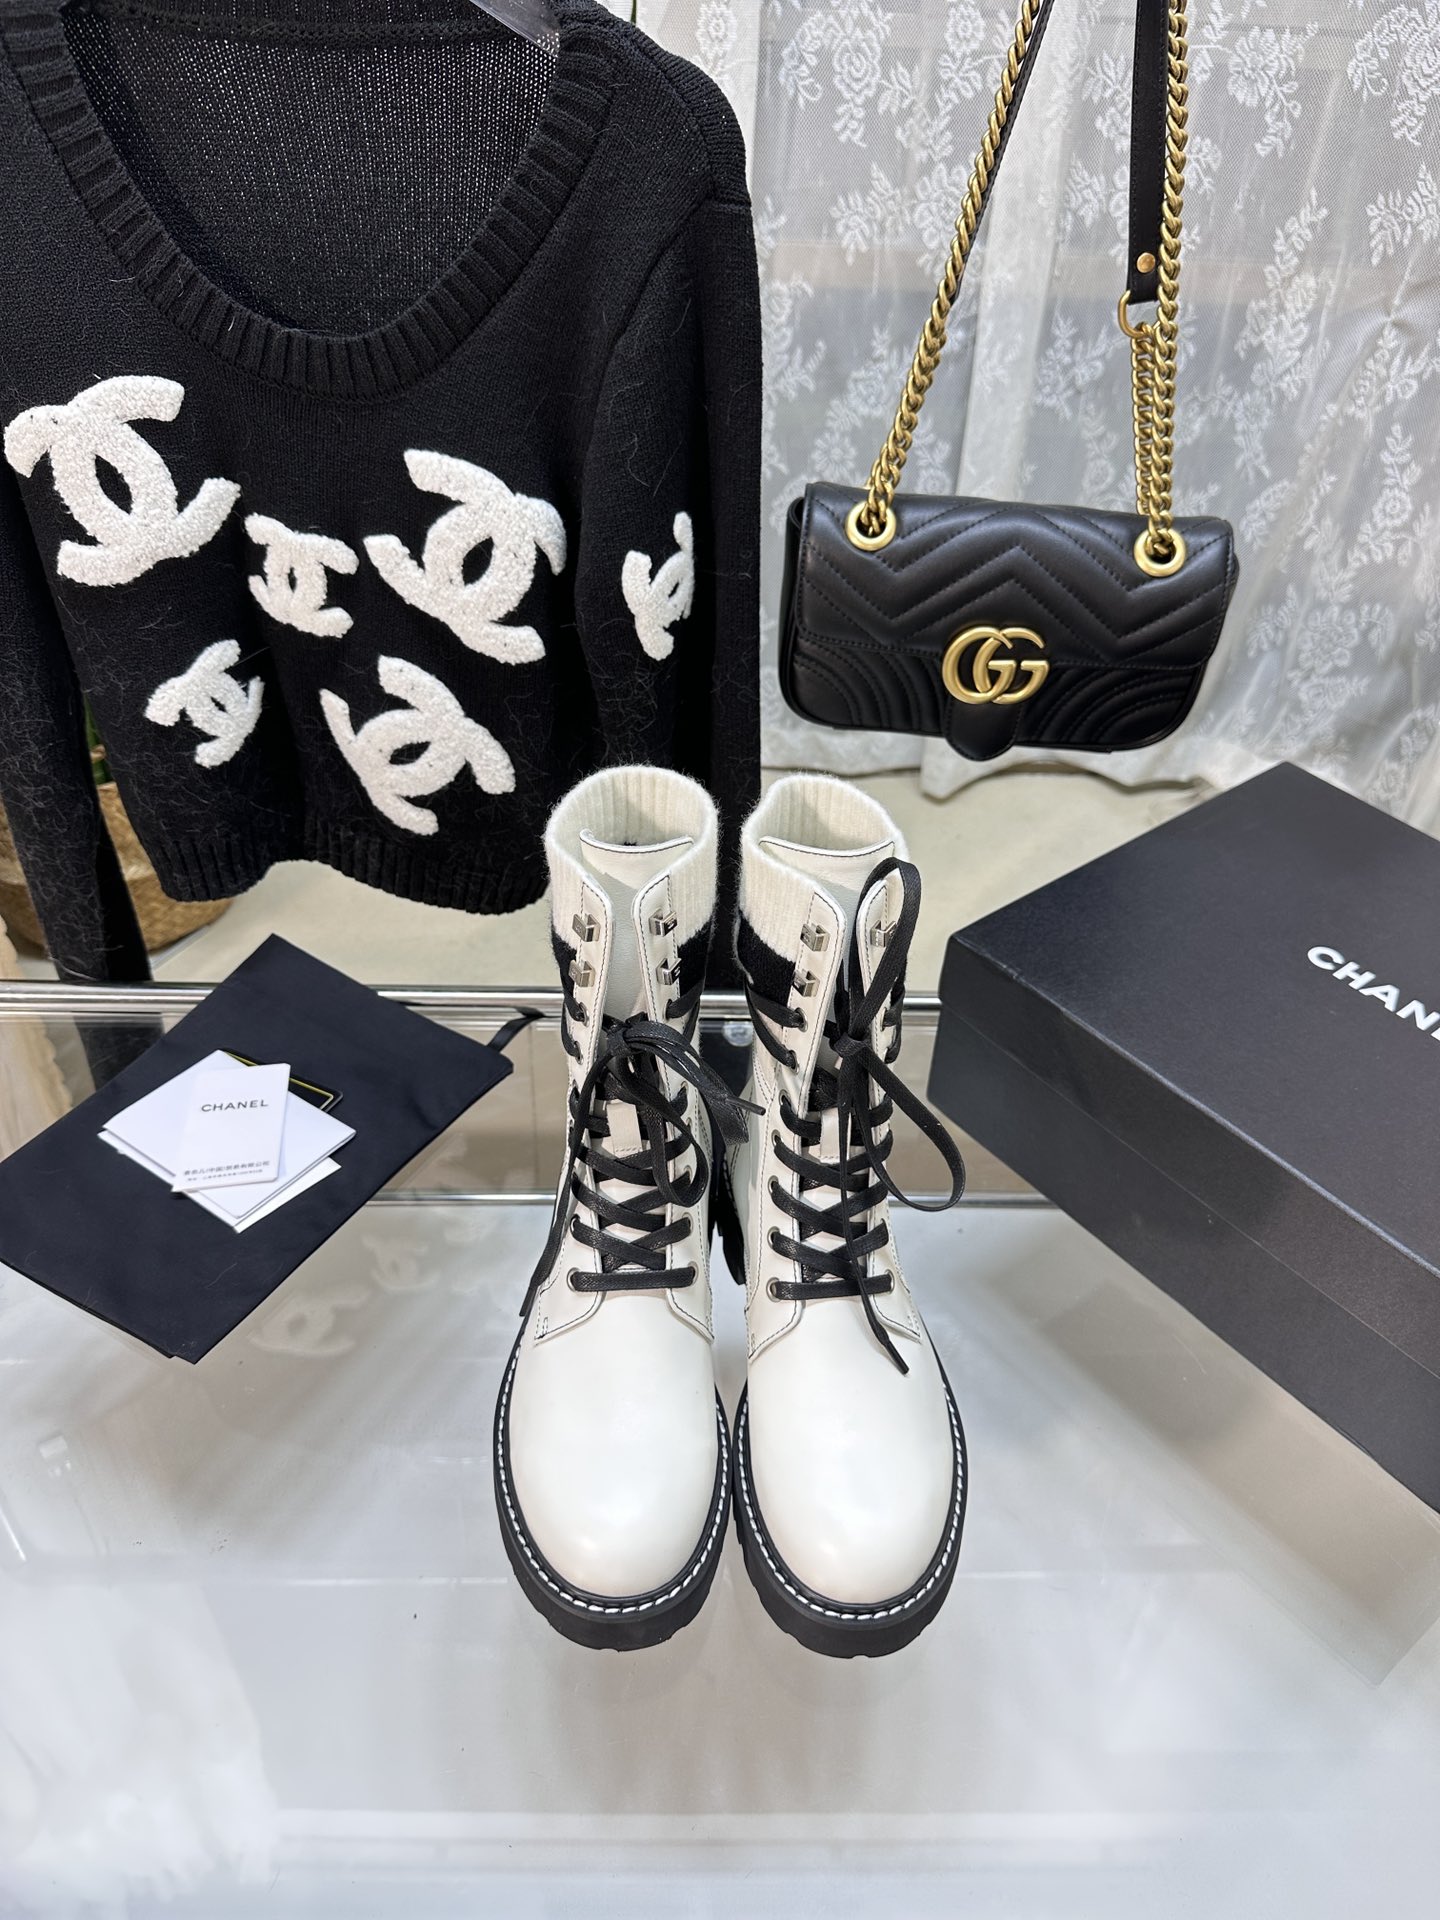 Where can I buy the best 1:1 original
 Chanel Short Boots Women Gold Hardware Cowhide Sheepskin Fall/Winter Collection Fashion